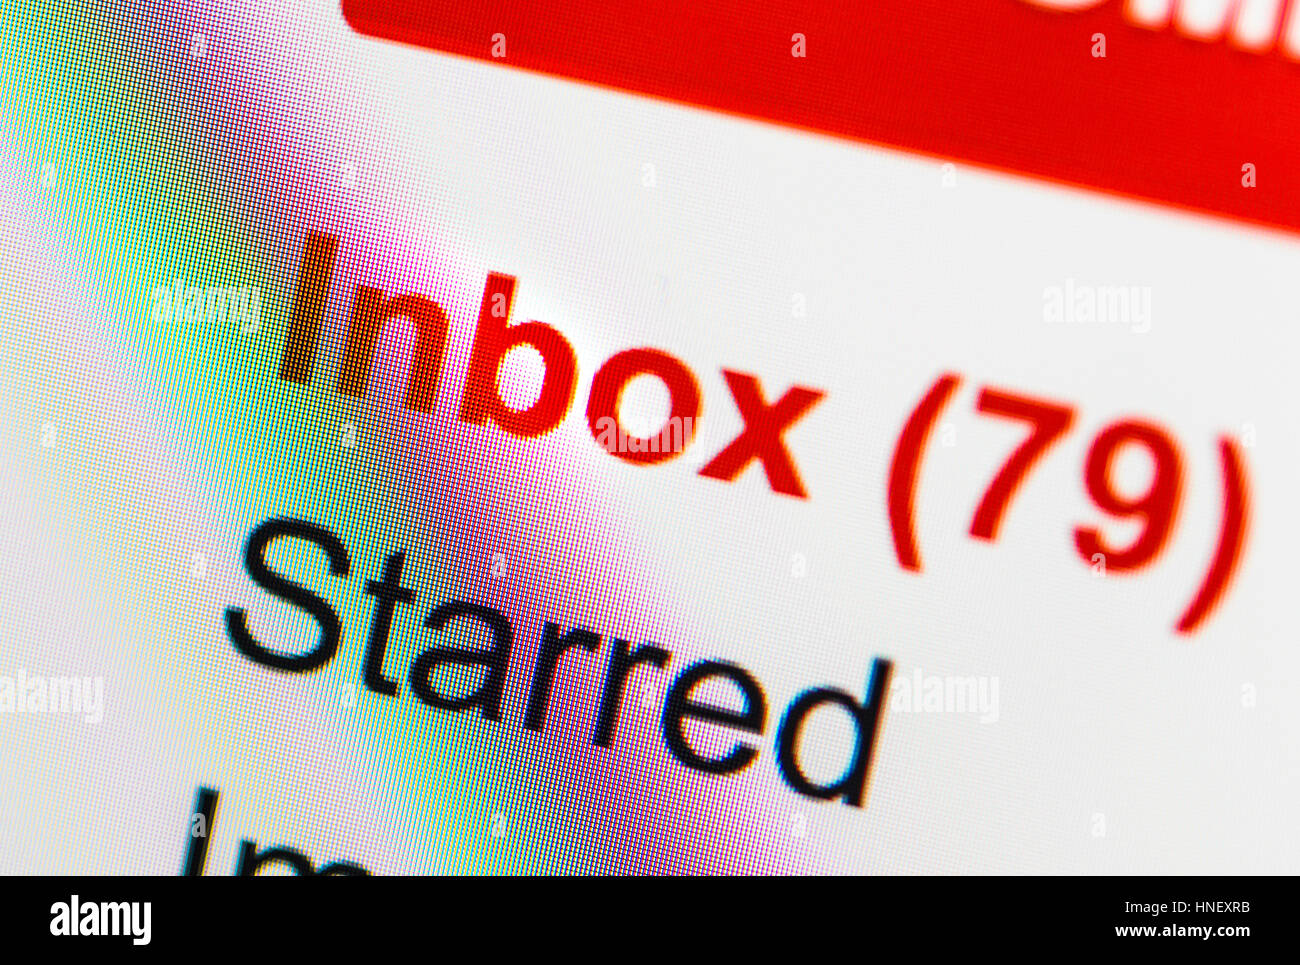 Unread emails, email account, email, internet, symbolic image, screenshot Stock Photo